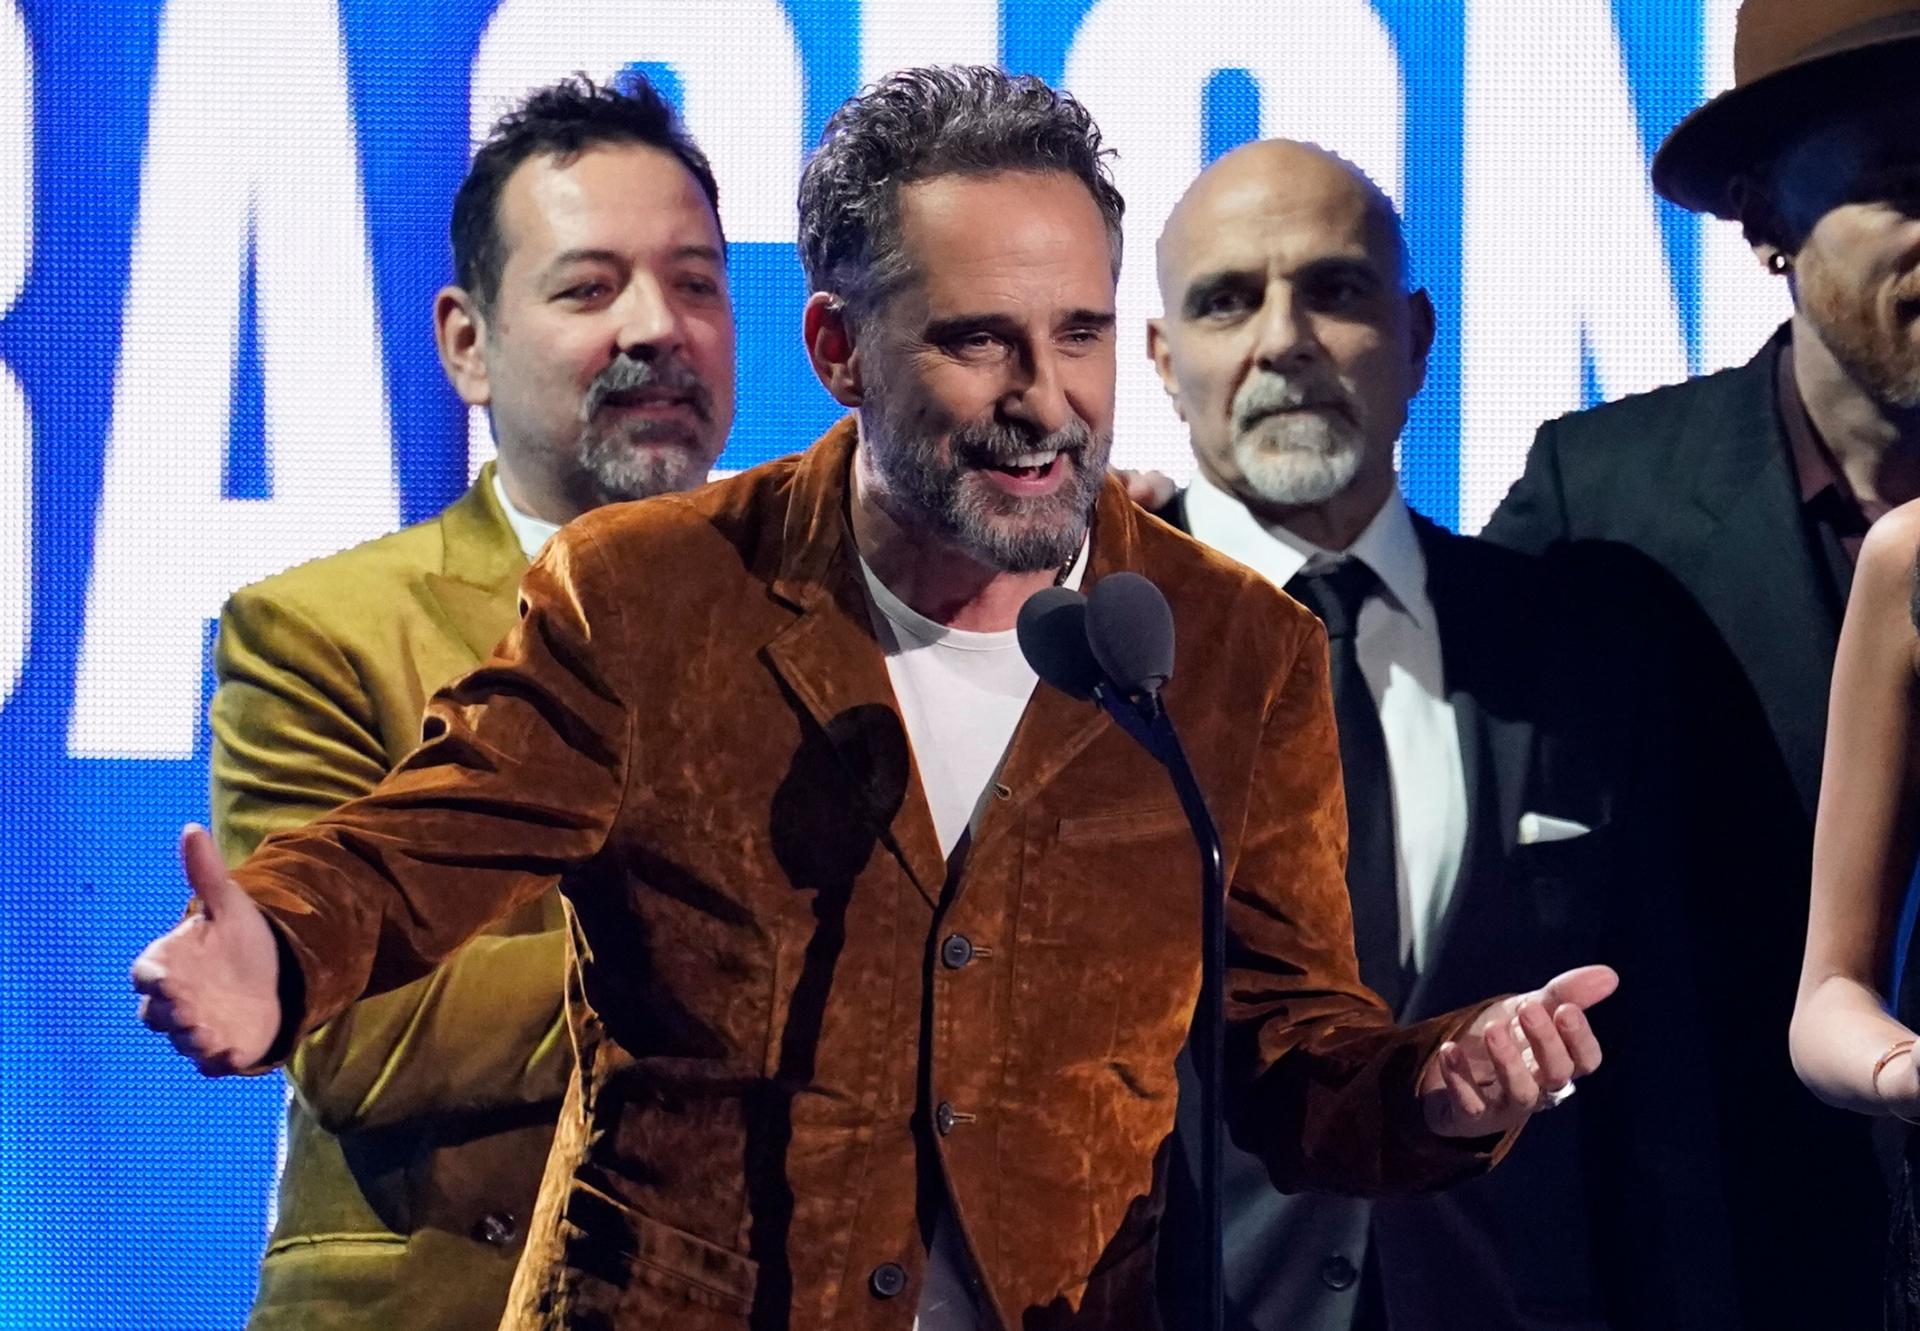 Jorge Drexler accepts the award for record of the year for "Tocarte" at the 23rd annual Latin Grammy Awards at the Mandalay Bay Michelob Ultra Arena on Thursday, Nov. 17, 2022, in Las Vegas.